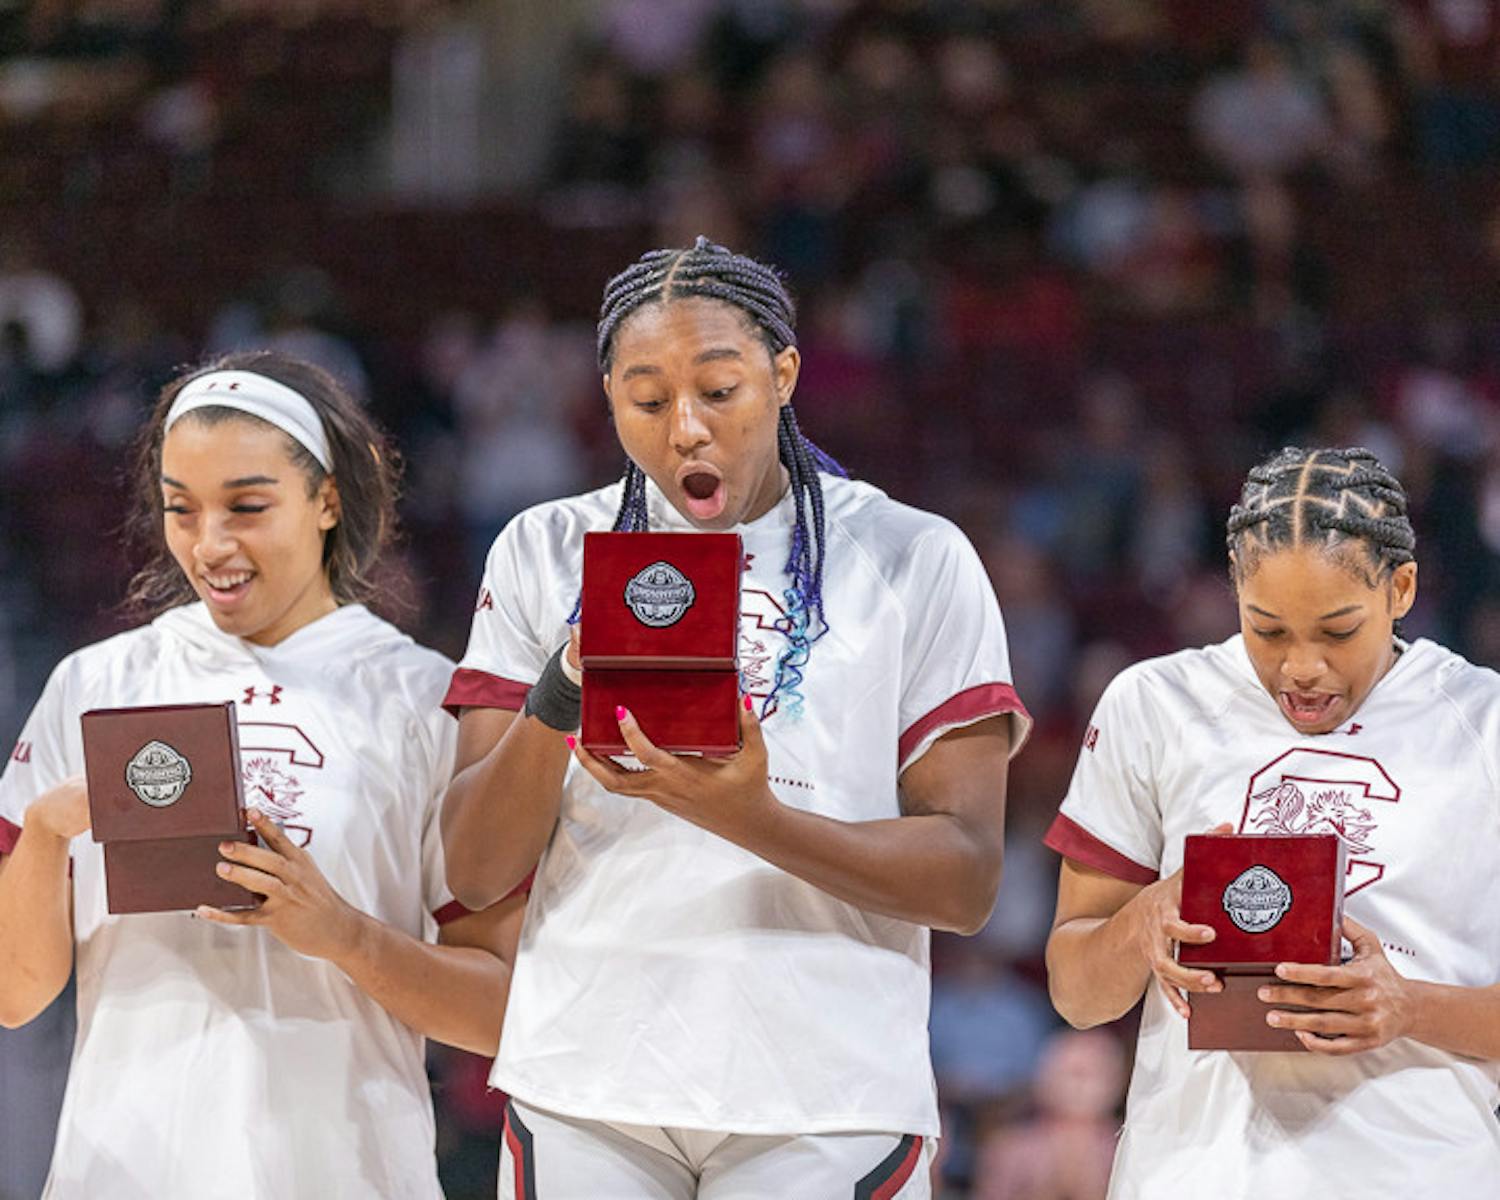 Senior forward Aliyah Boston (center) reacts to seeing her National Championship ring. South Carolina played East Tennessee State on Nov. 7, 2022. The Gamecocks beat East Tennessee State 101- 31.